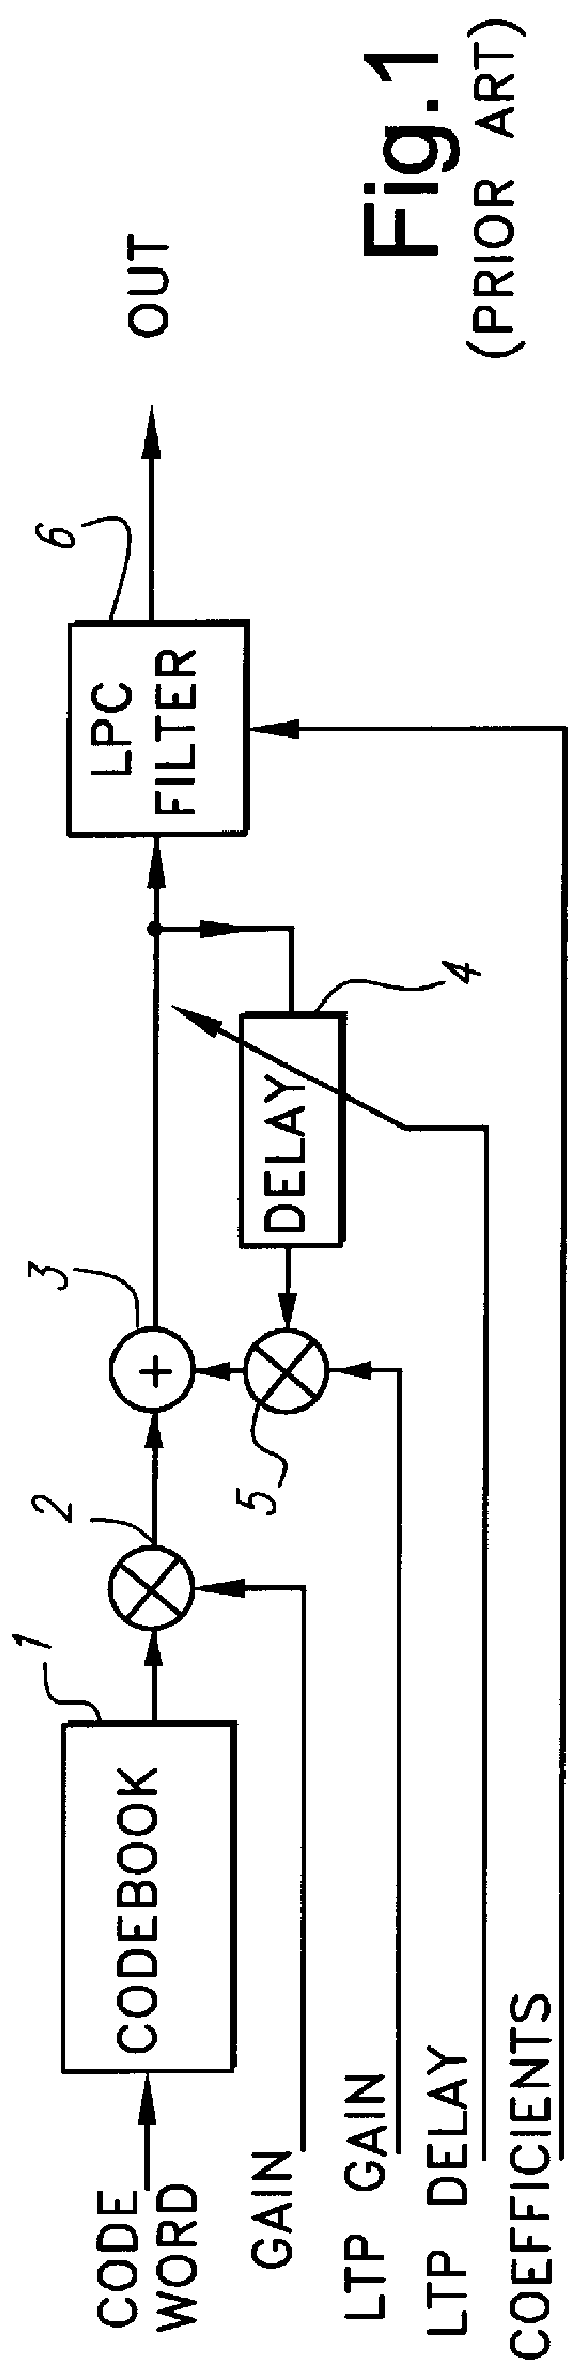 Generating the variable control parameters of a speech signal synthesis filter